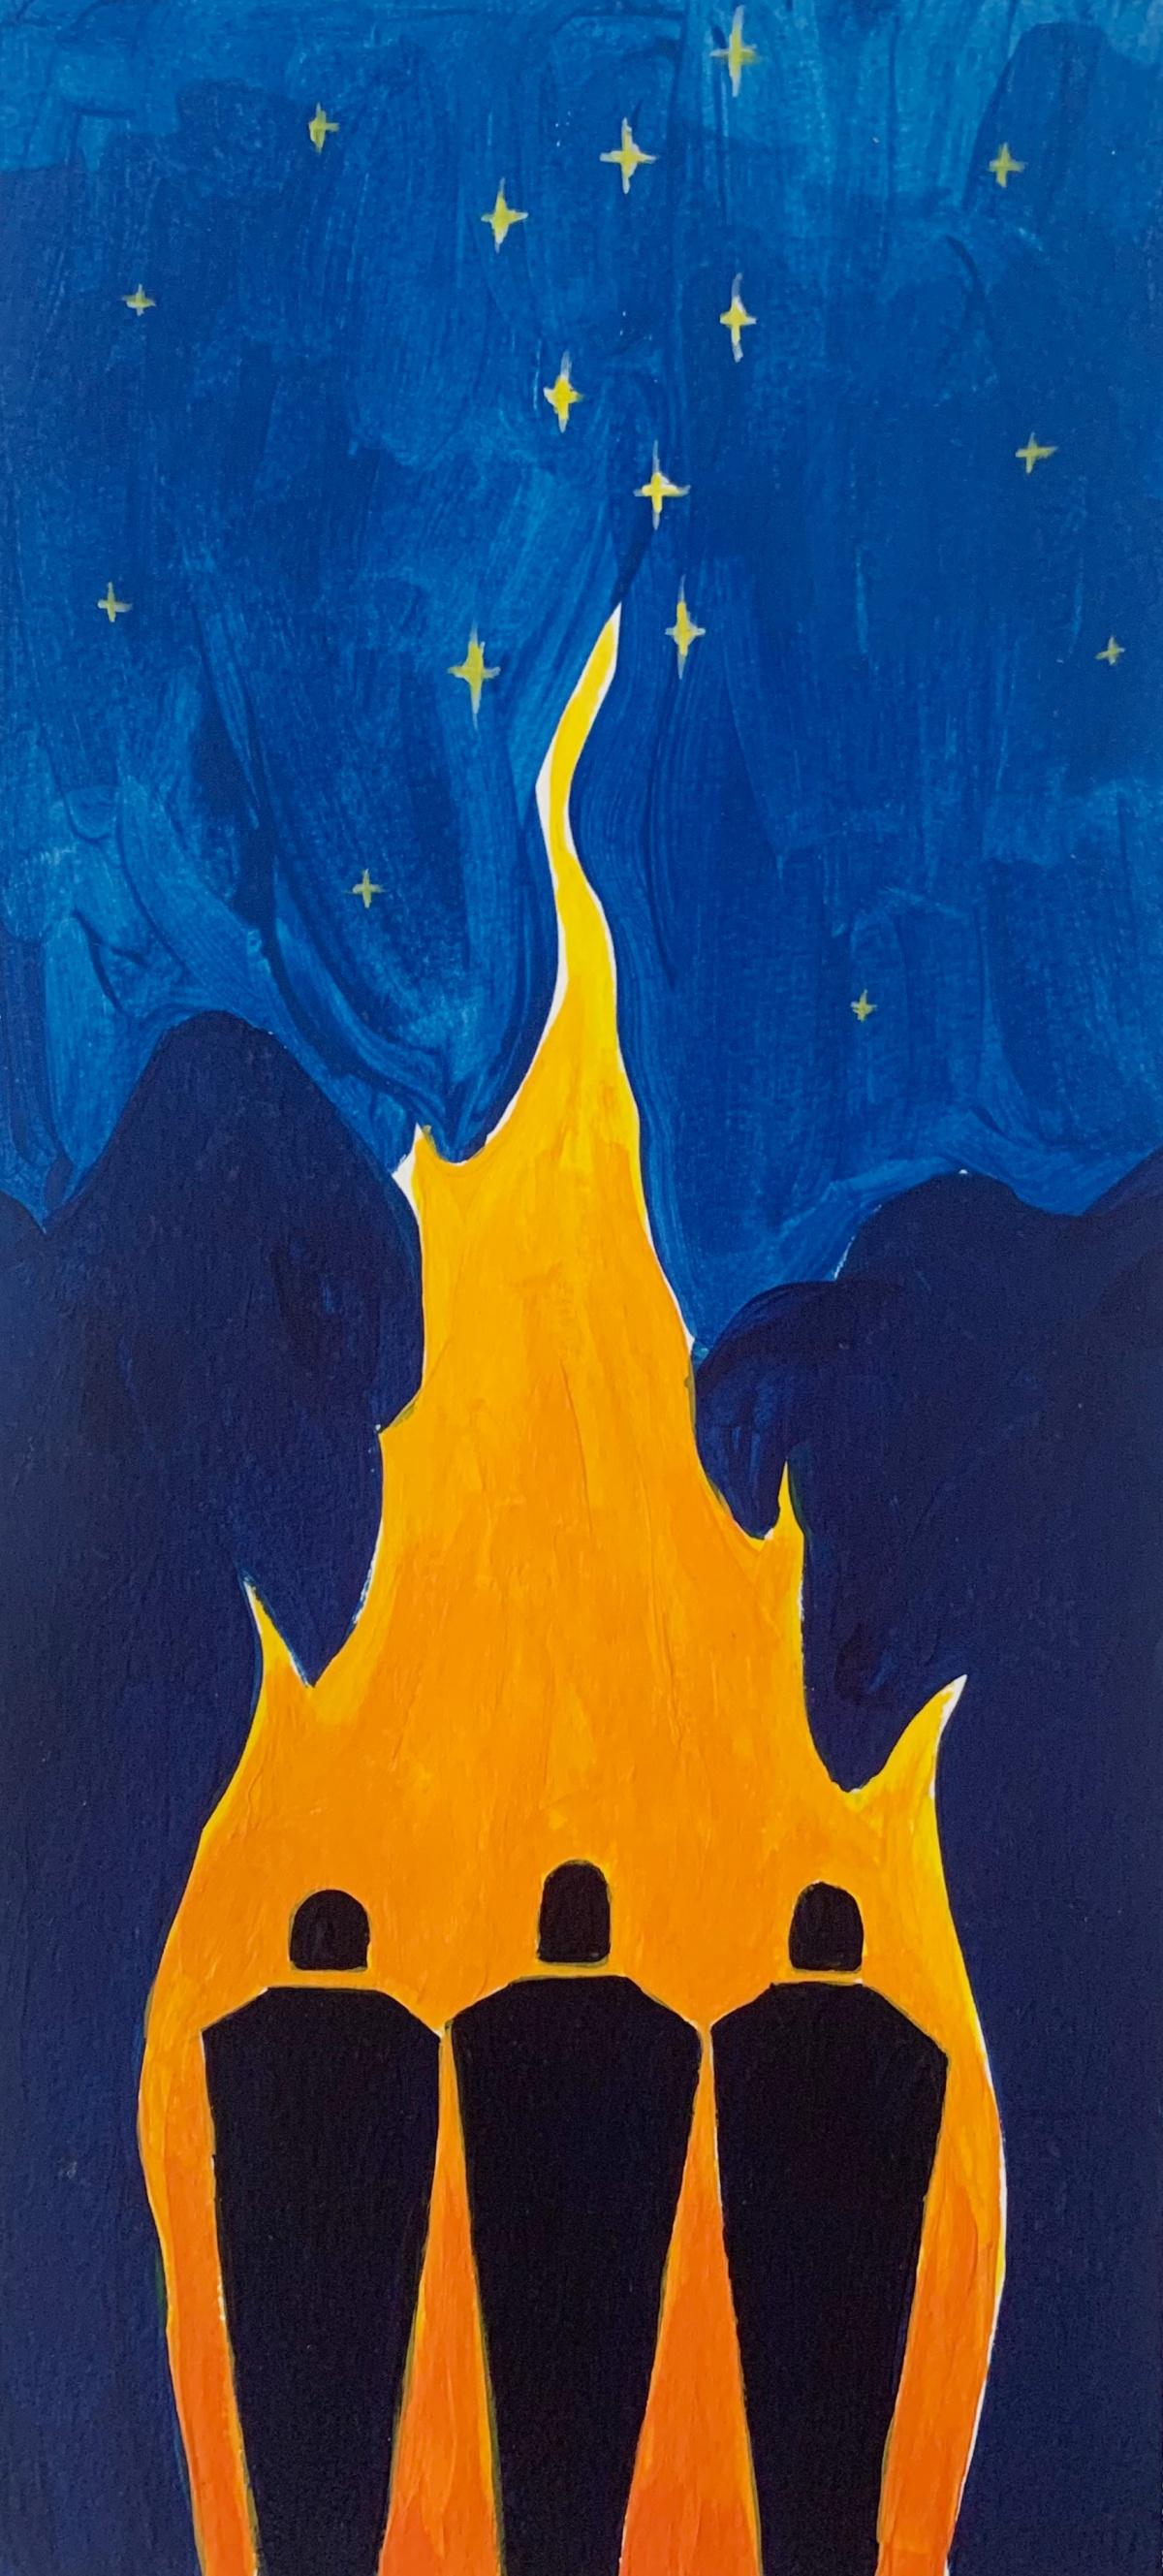 Waleria Matelska Abstract Painting - Fire - Figurative Painting on Paper, Minimalist, Colorful, Vibrant